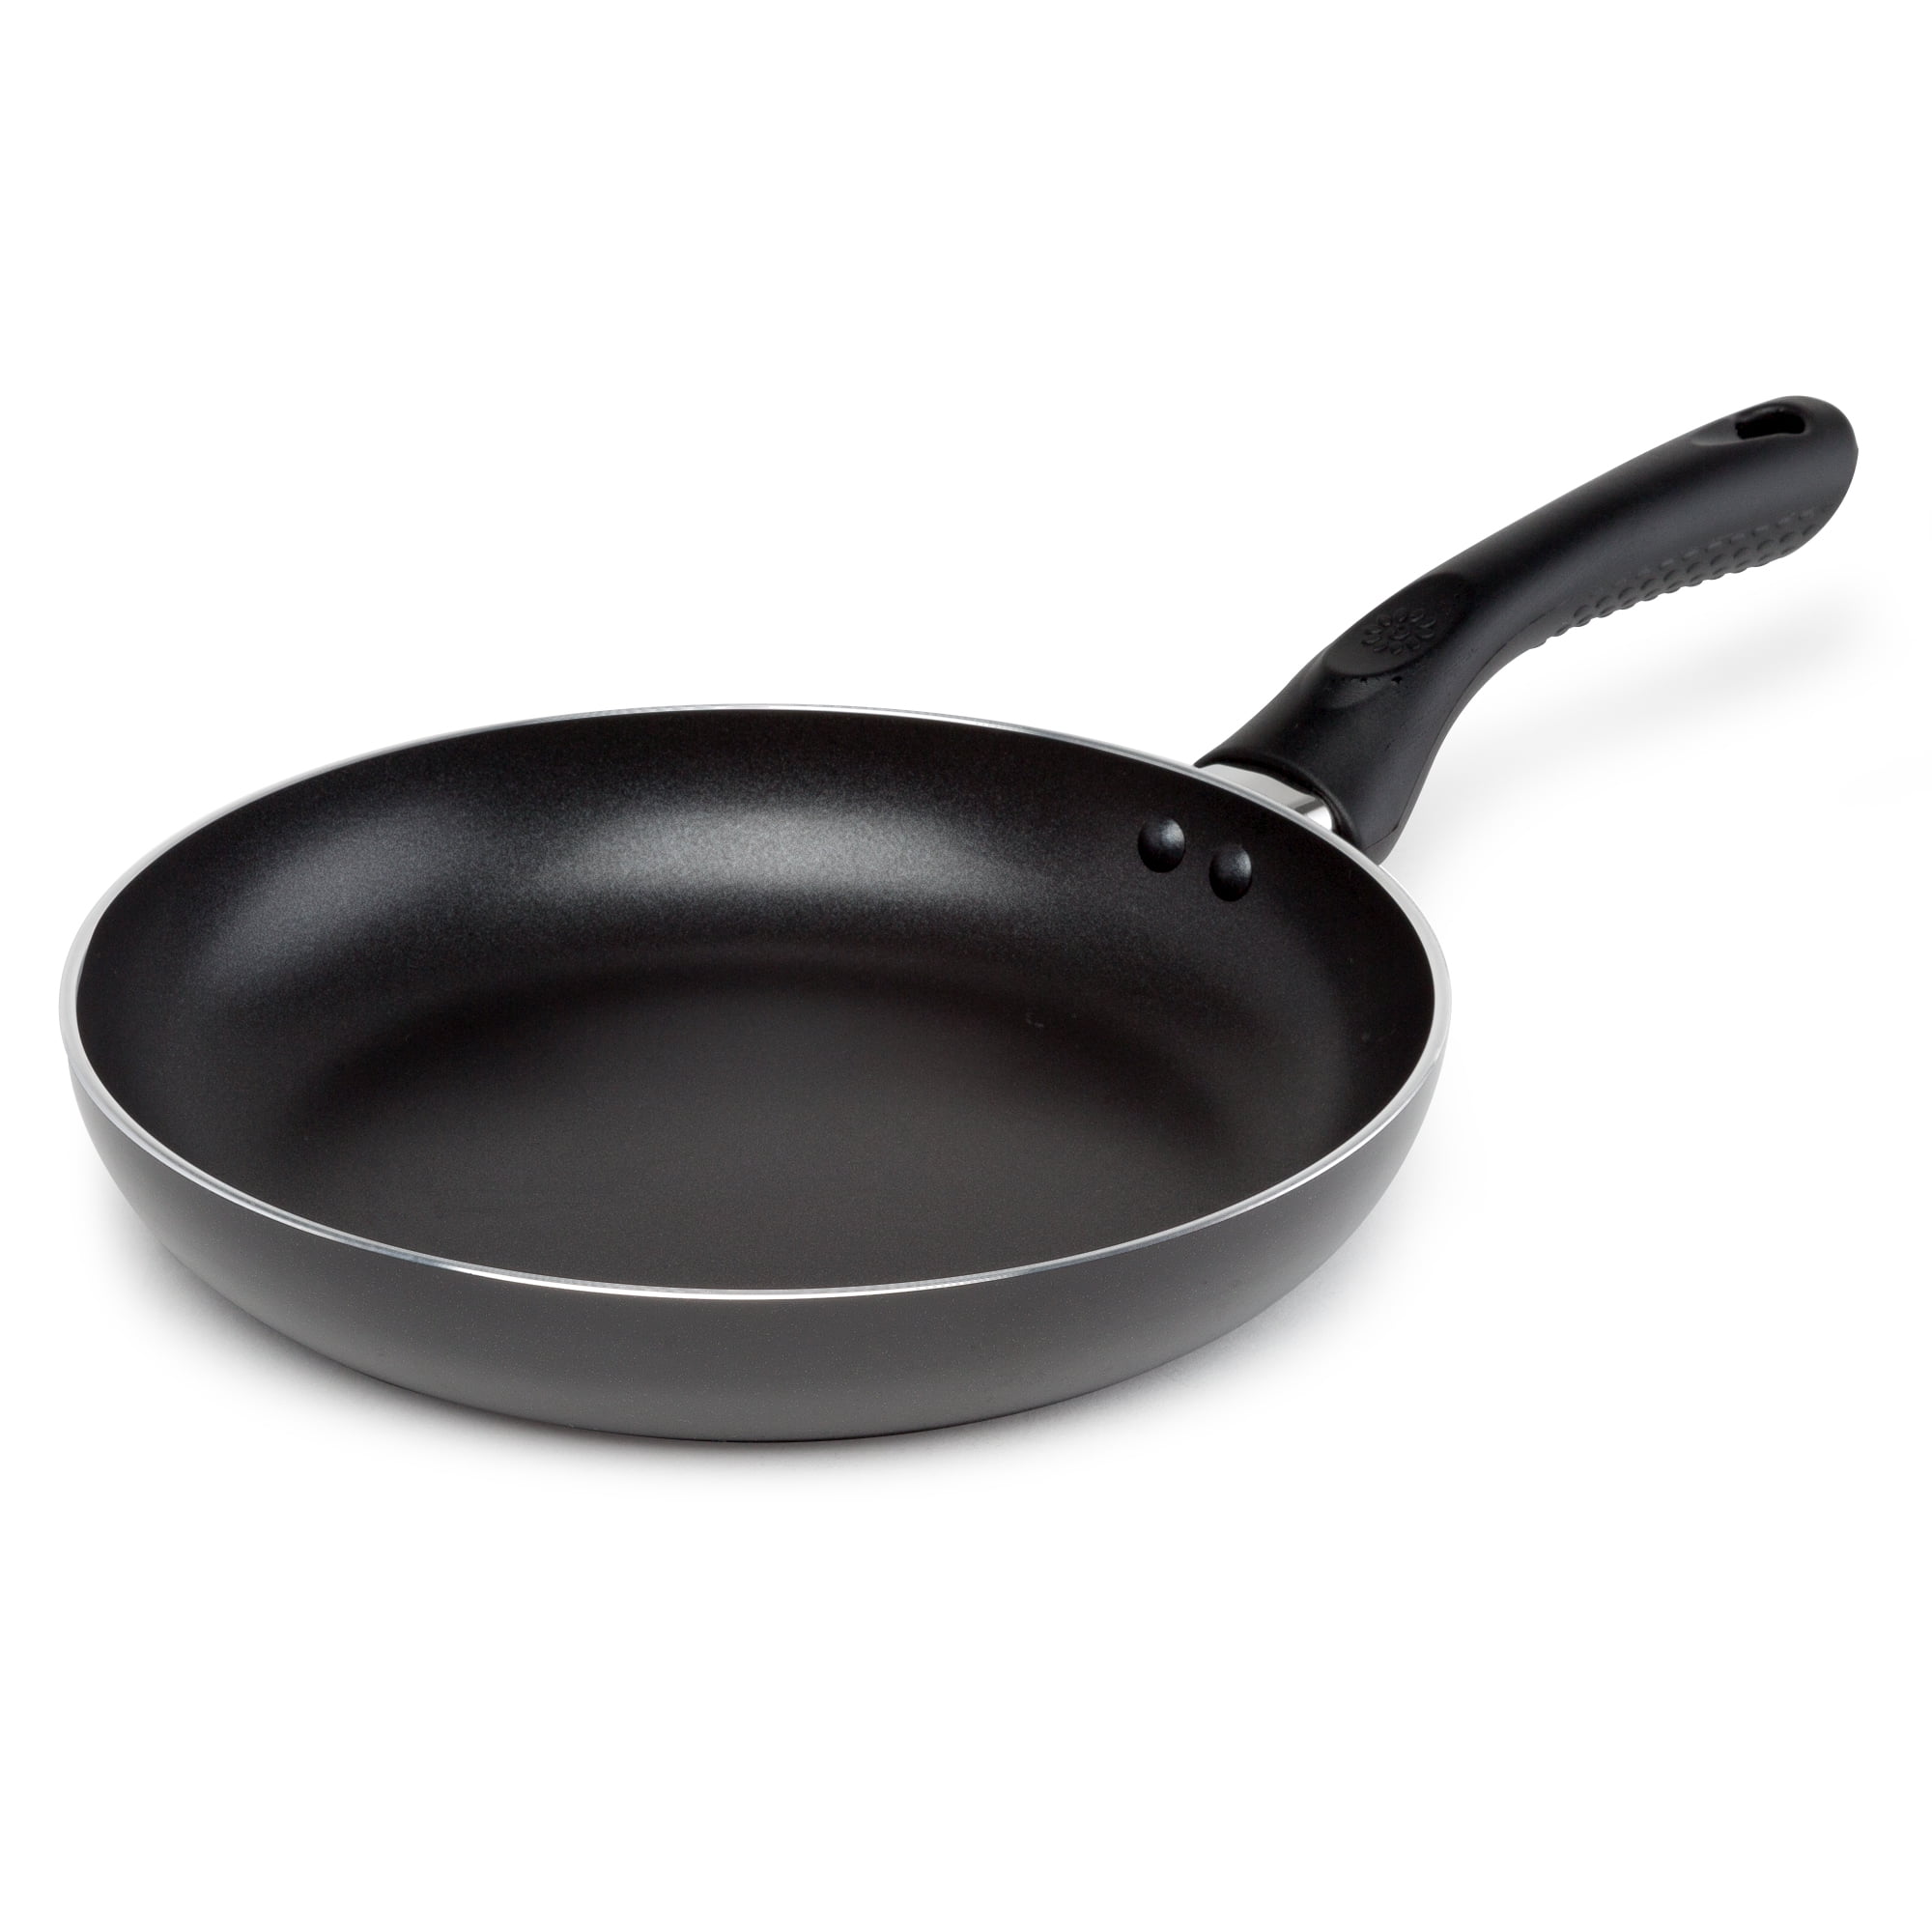 Ecolution Evolve Non-Stick Frying Pan, Dishwasher Safe, Silicone Handle ...